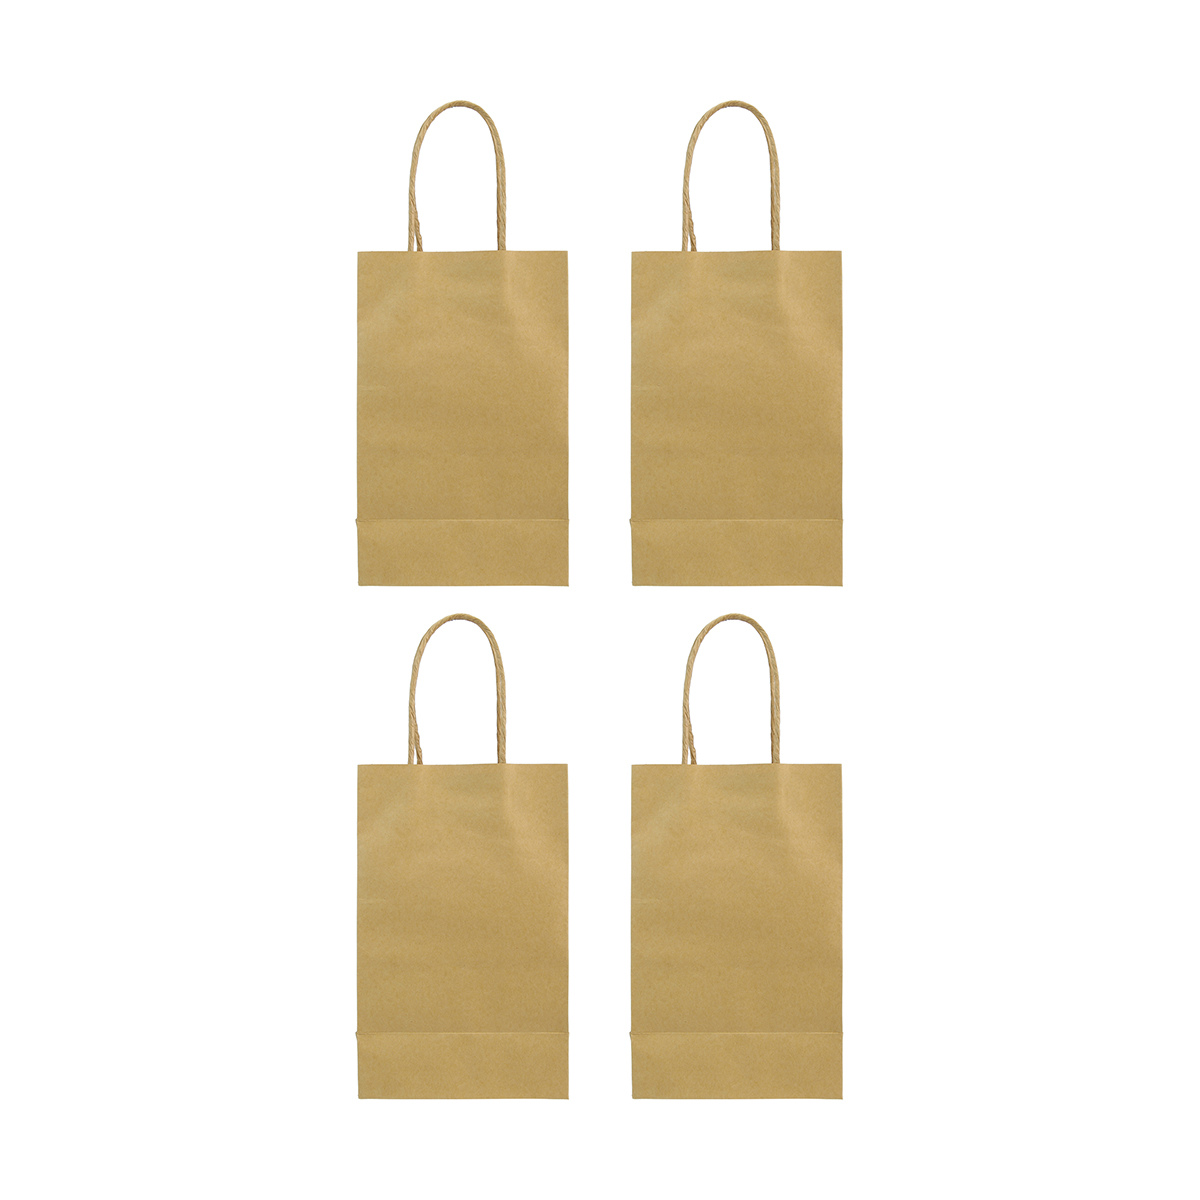 Craft Bags - 4 Pack | Kmart